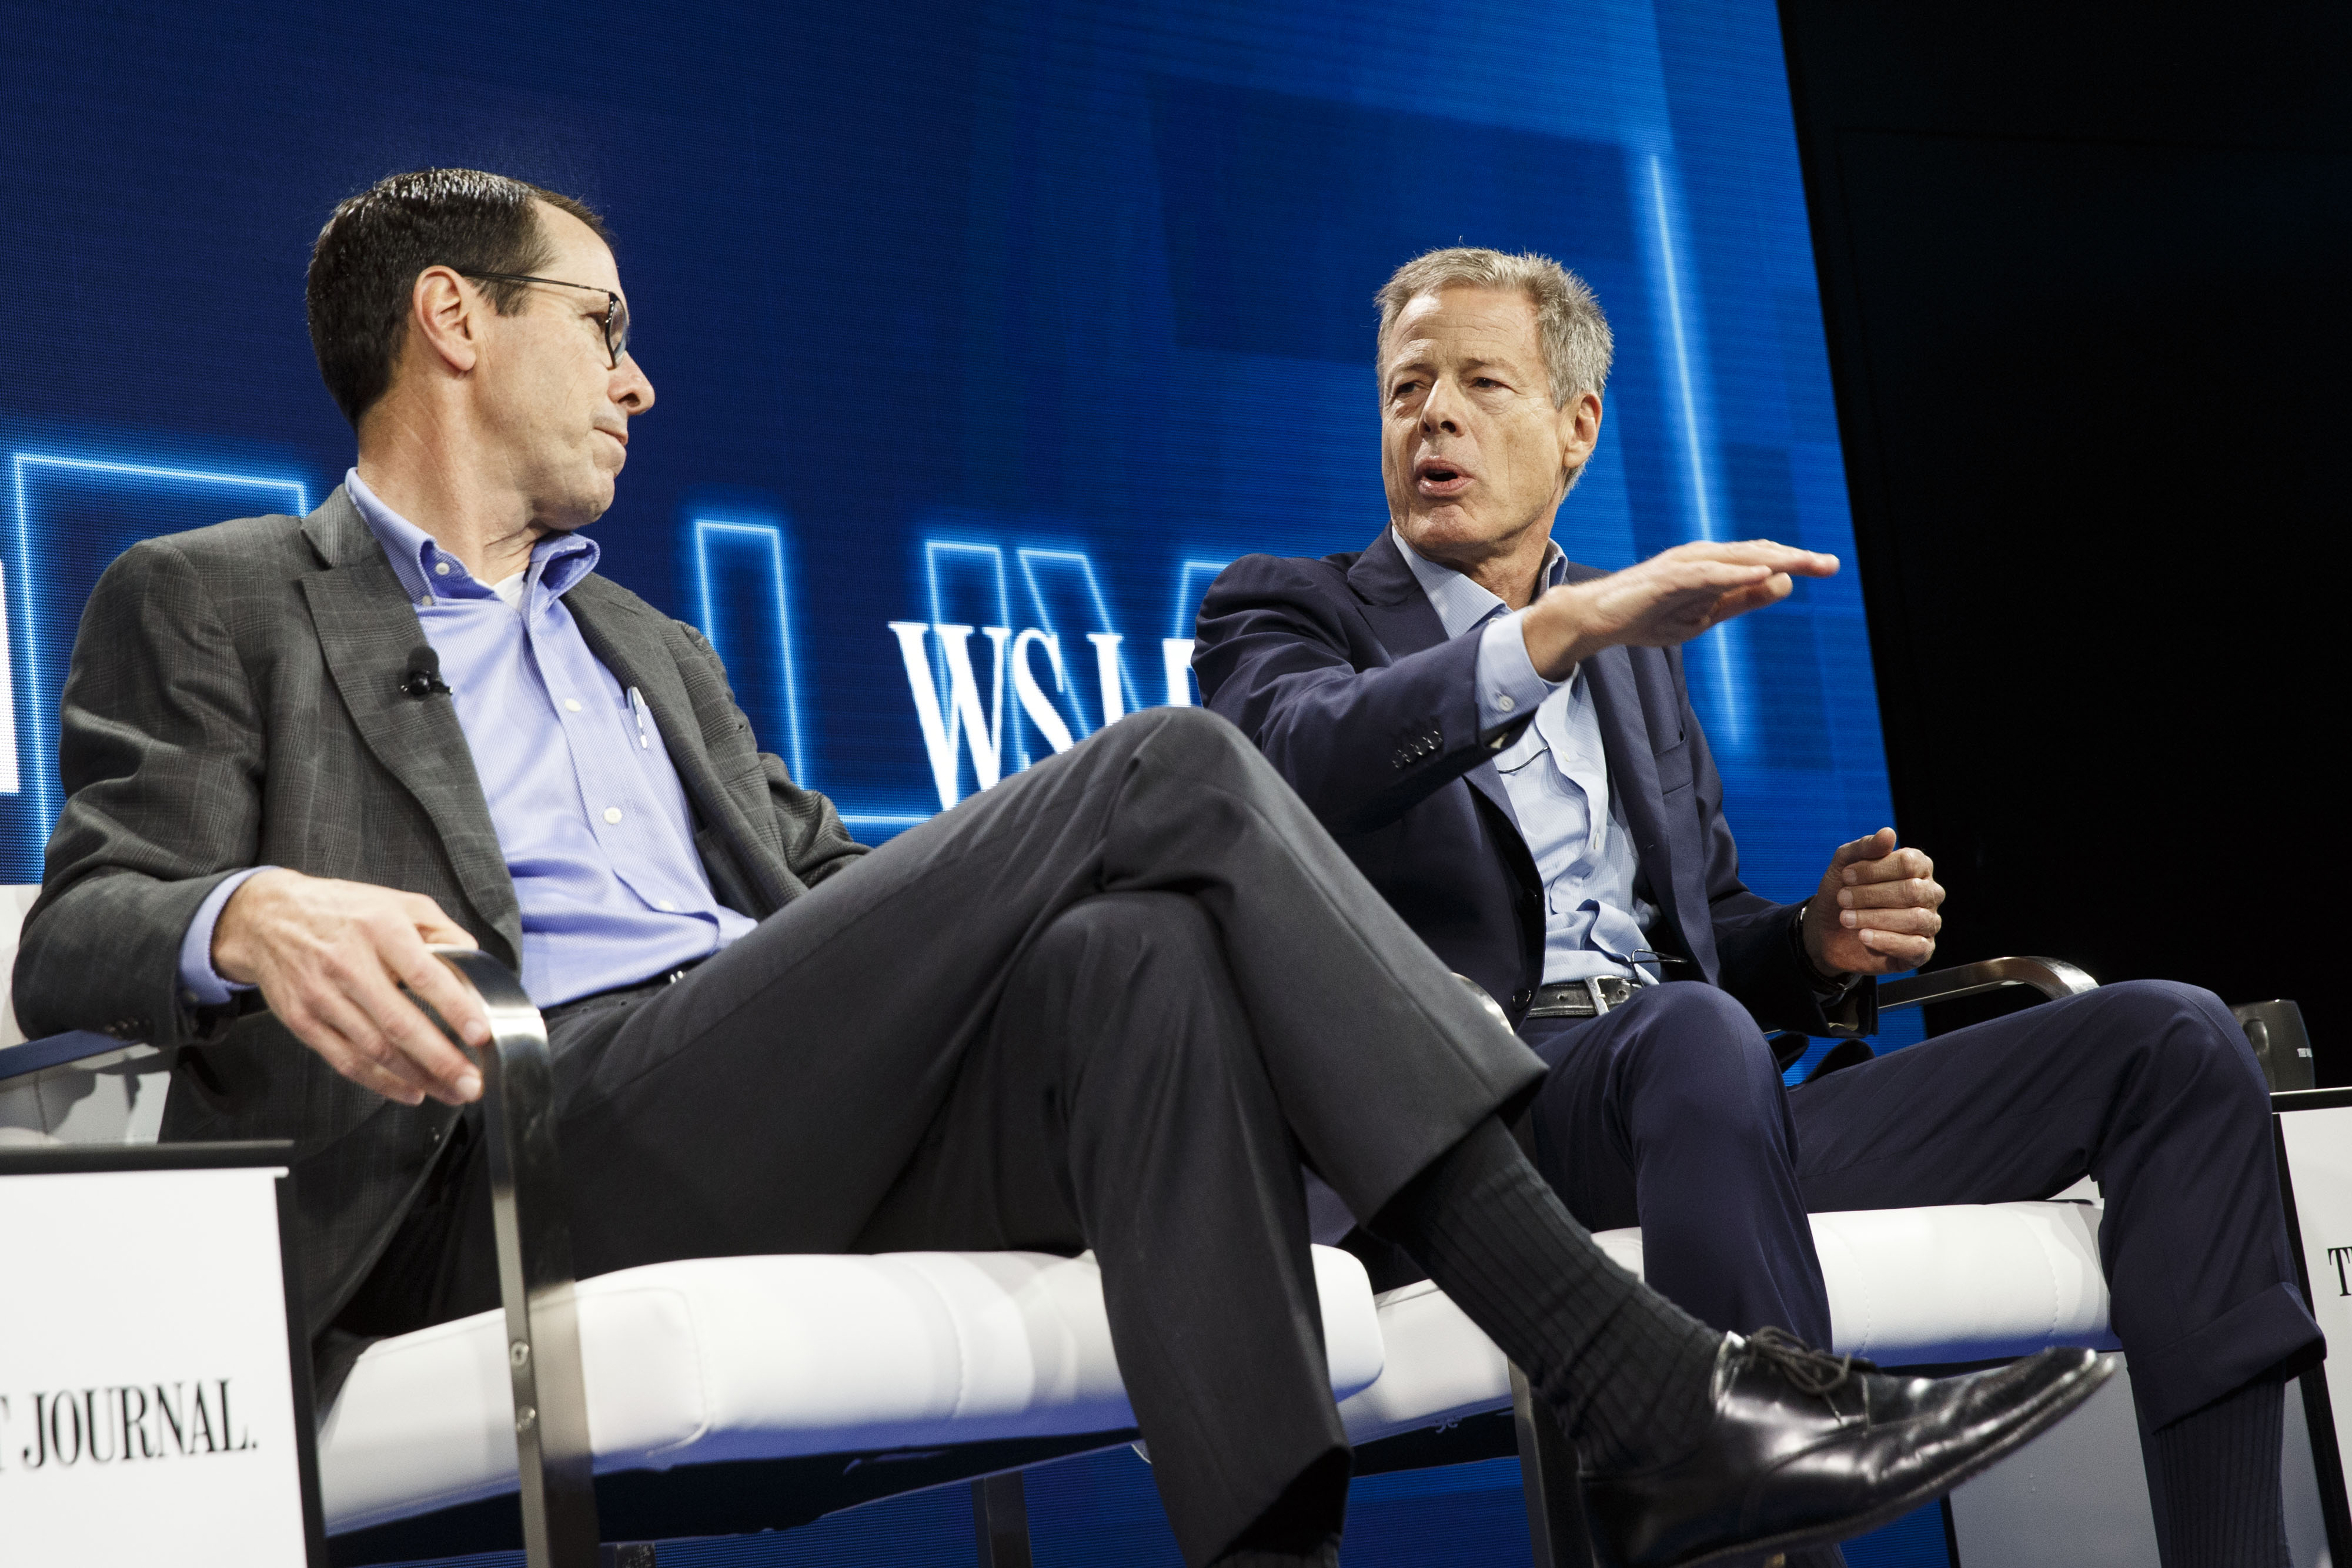 Randall Stephenson, chairman and chief executive officer of AT&T Inc., left, listens while Jeffrey 